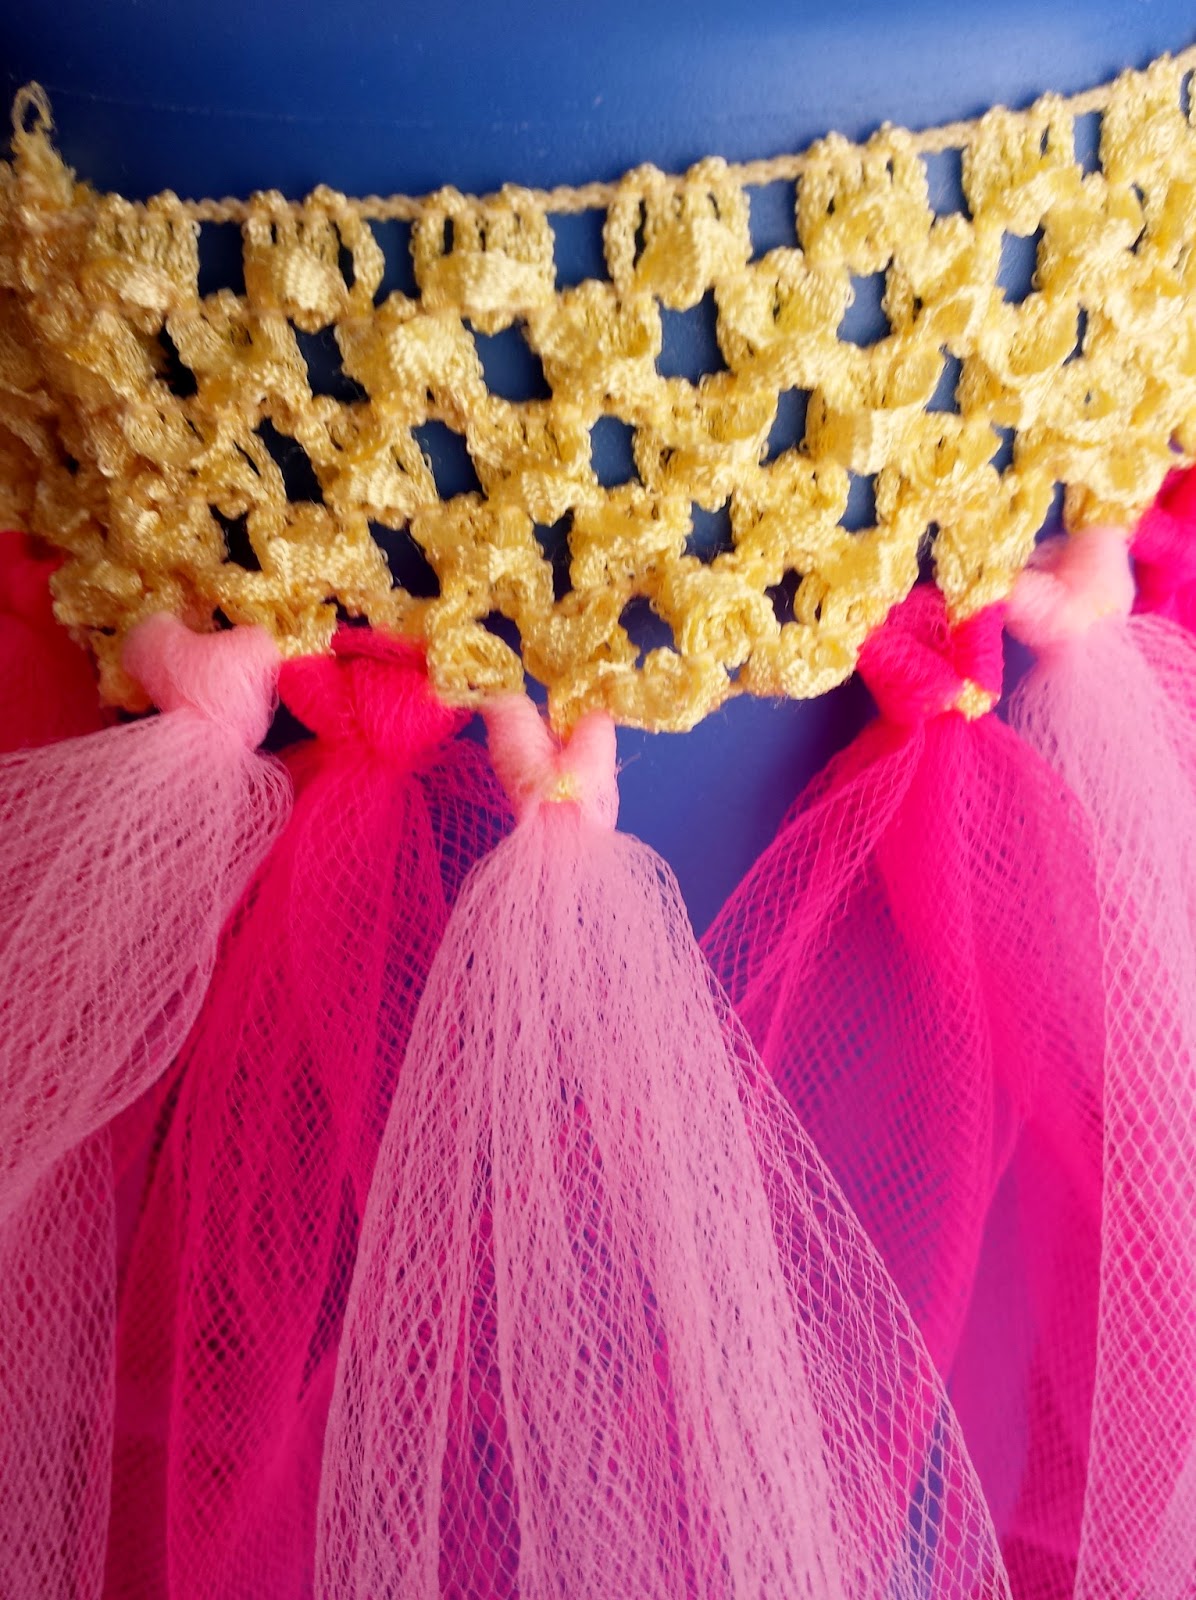 Triplets + Toddler: DIY Tutus and High Chair Skirts